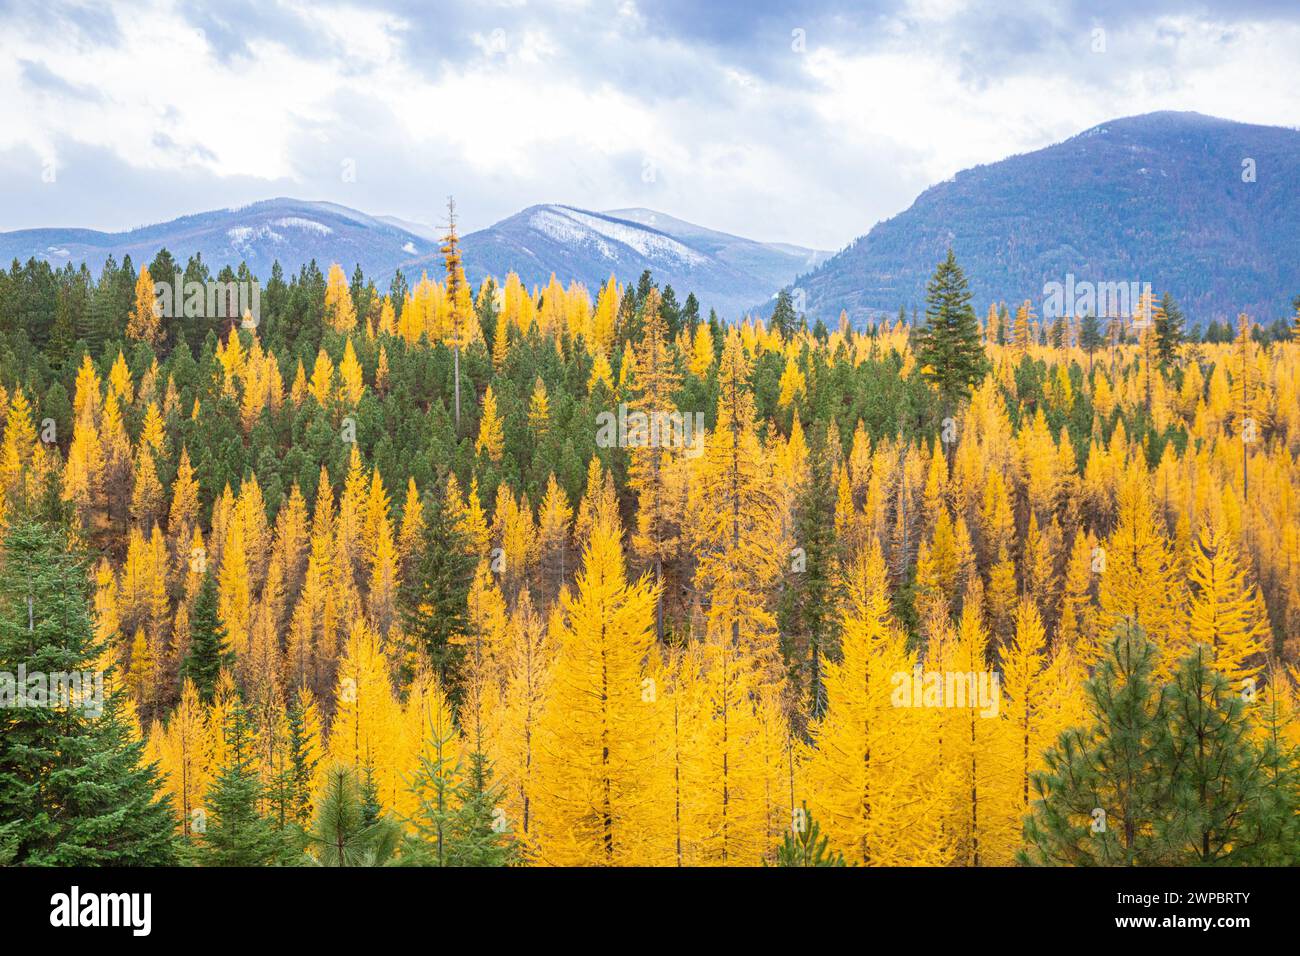 Larch and Evergreen forests and the Selkirk Mountain Range Stock Photo